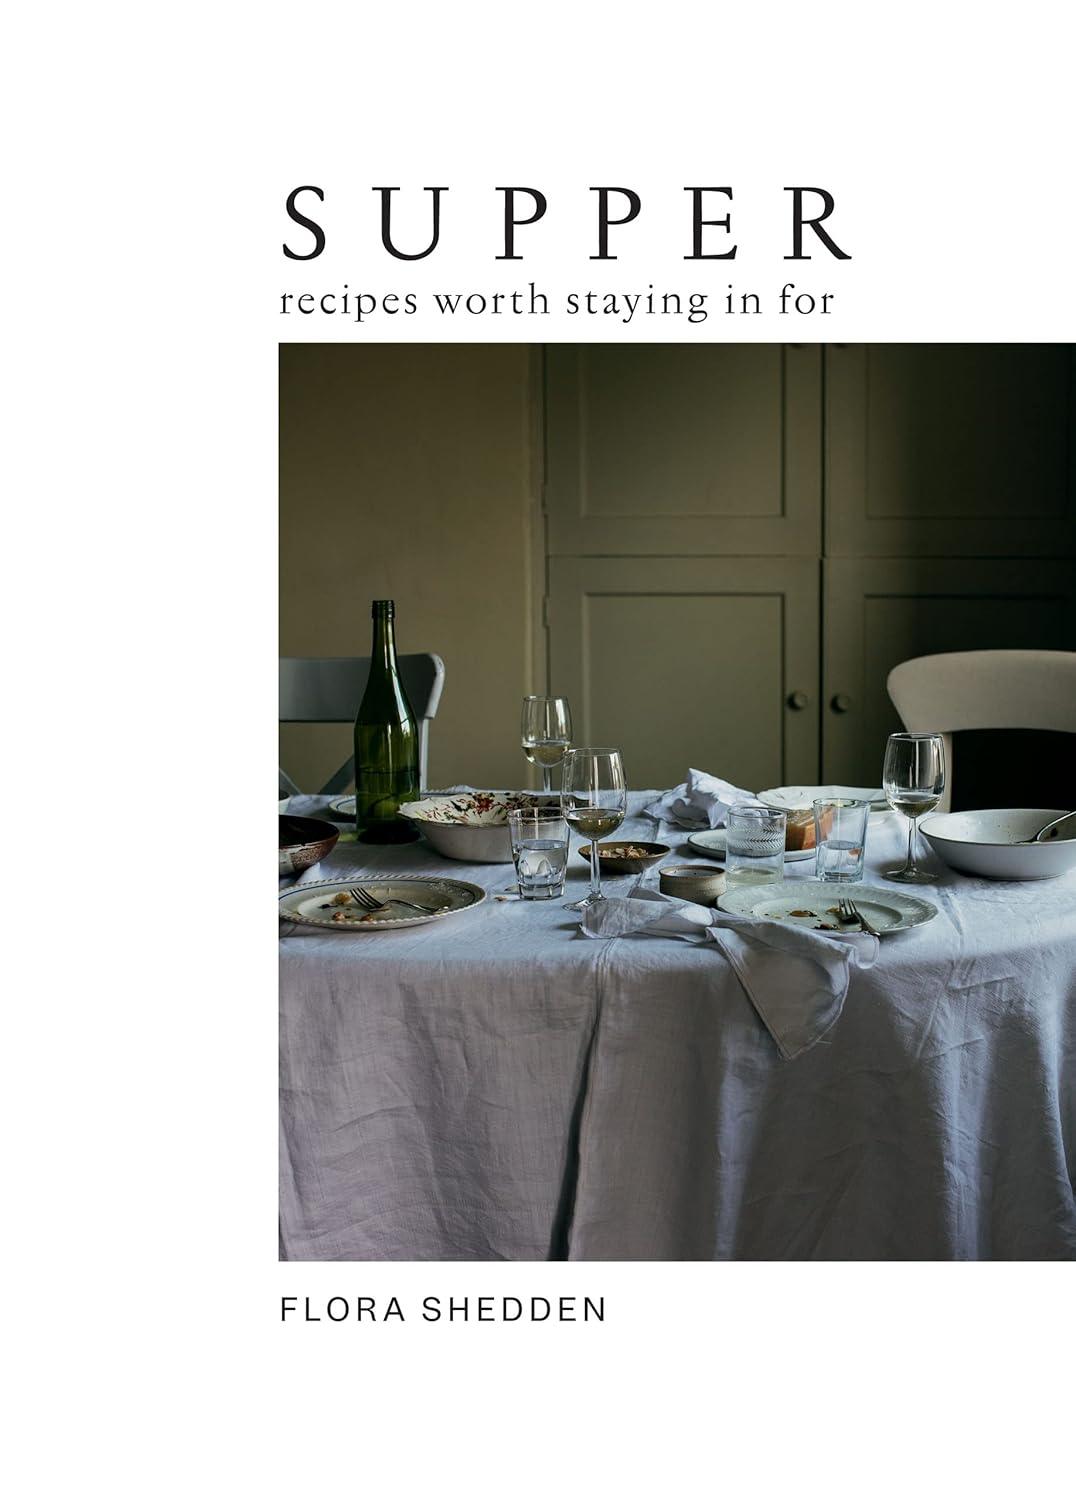 Supper: Recipes Staying in for